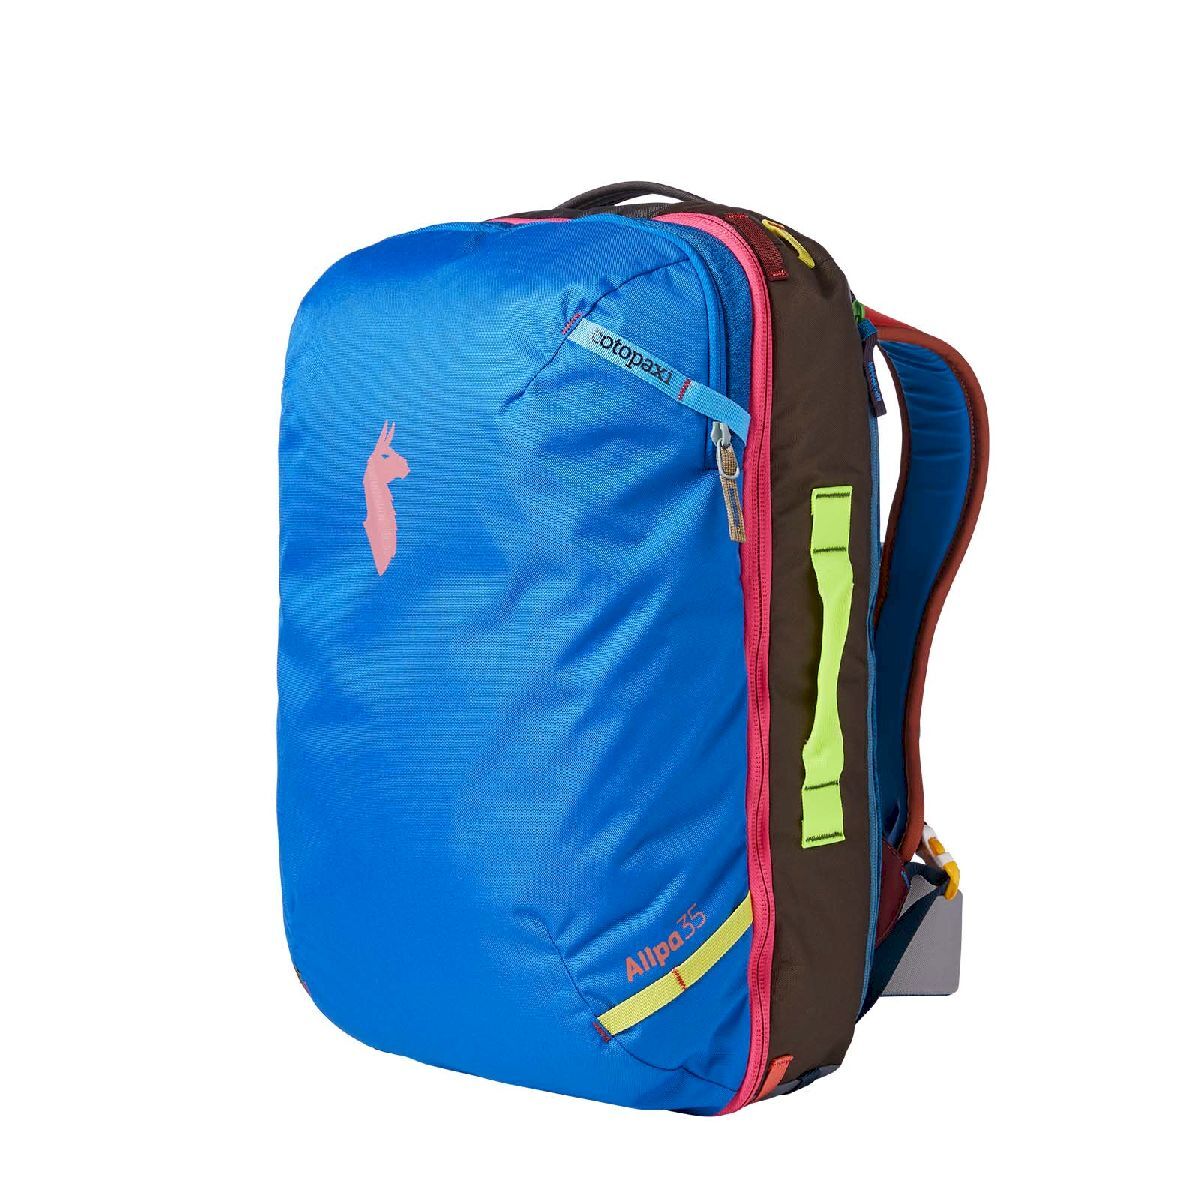 Cotopaxi Allpa 35L Travel Pack - Travel backpack